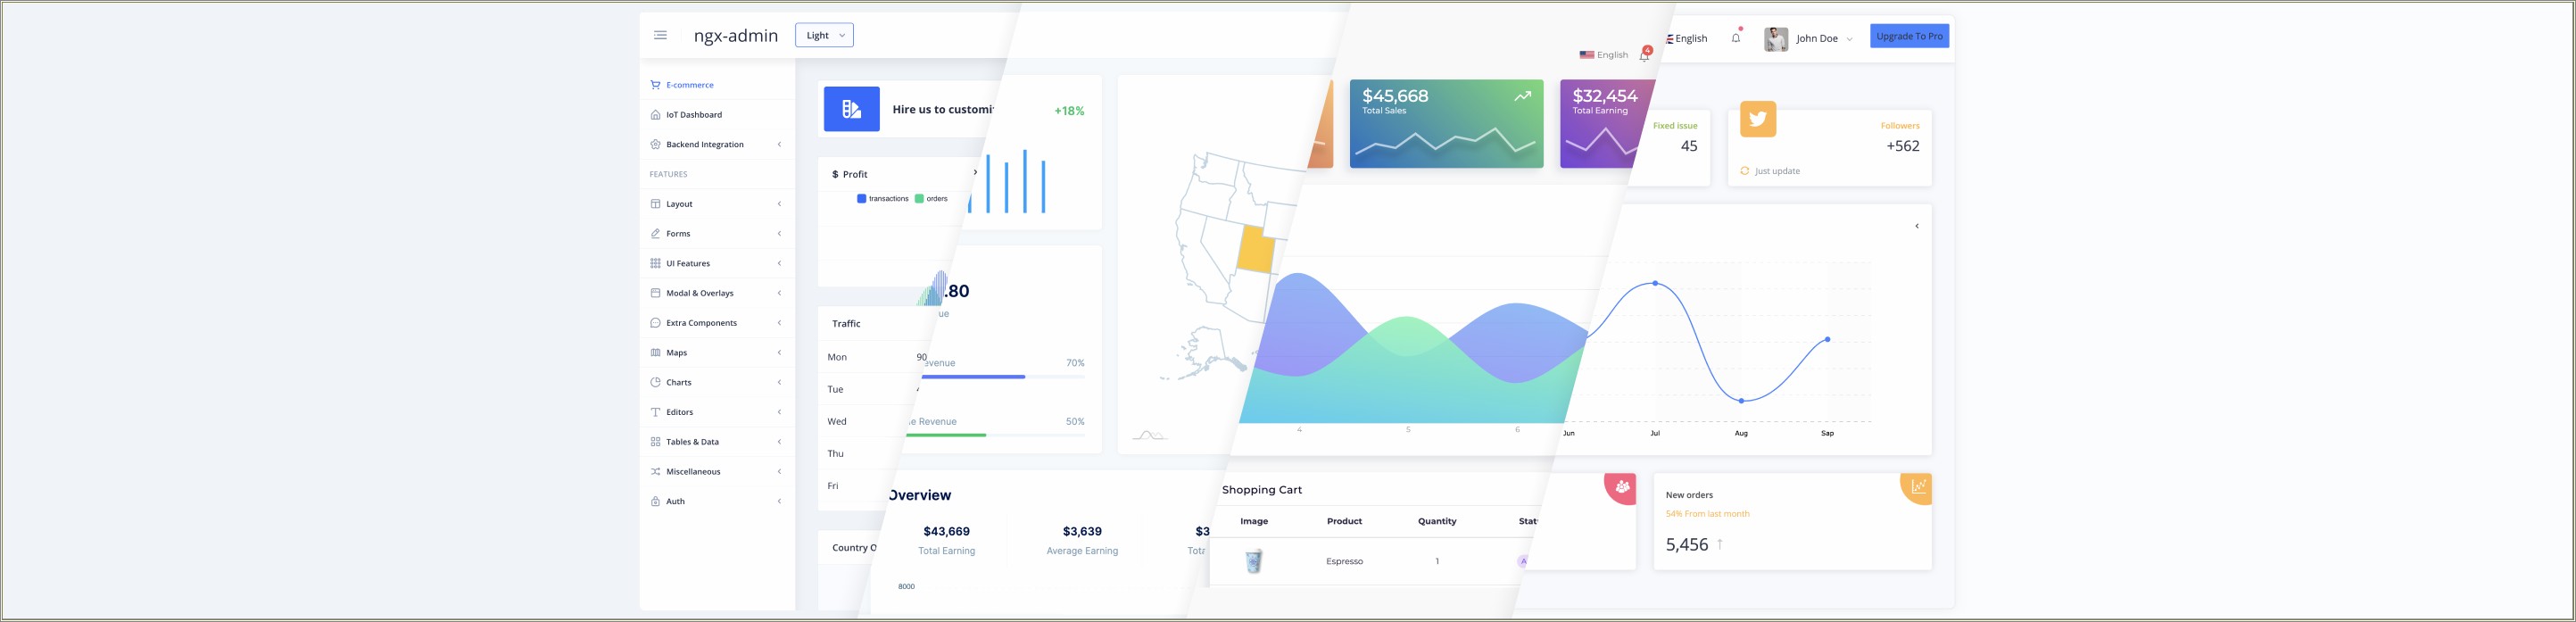 Apex Angular 4 Bootstrap Admin Template Free Download